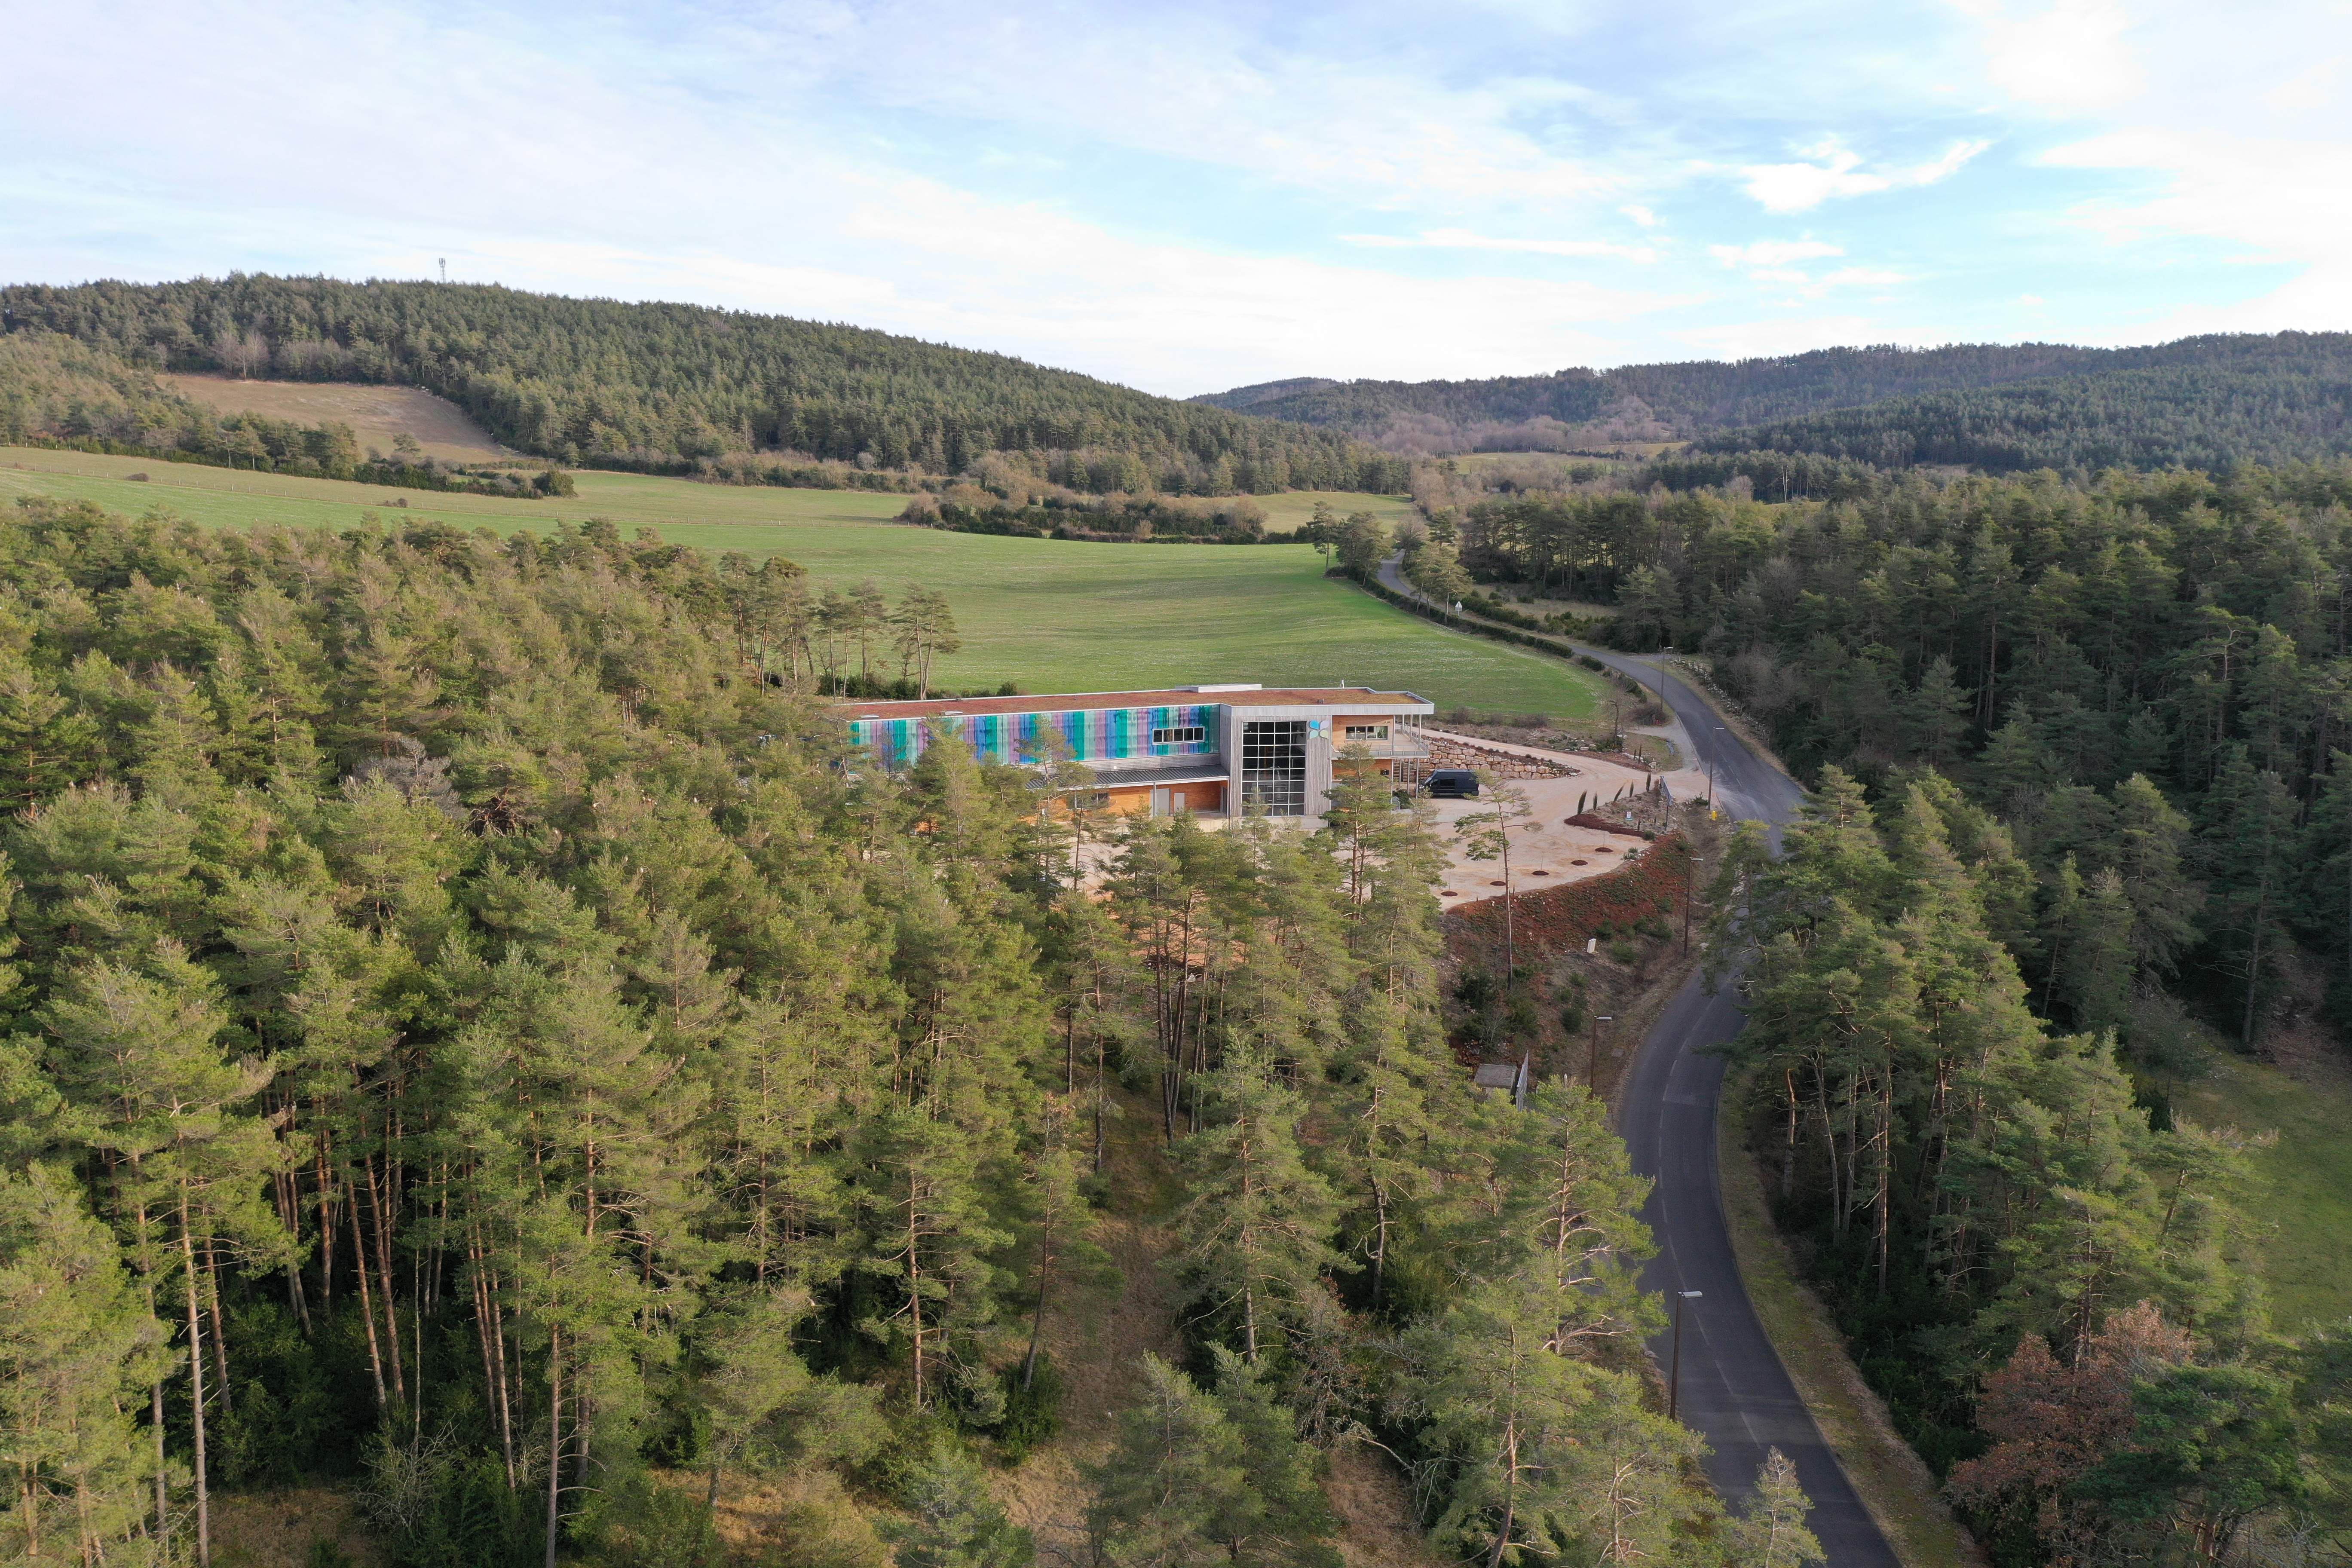 Drone shot of the distillery in the heart of the forest